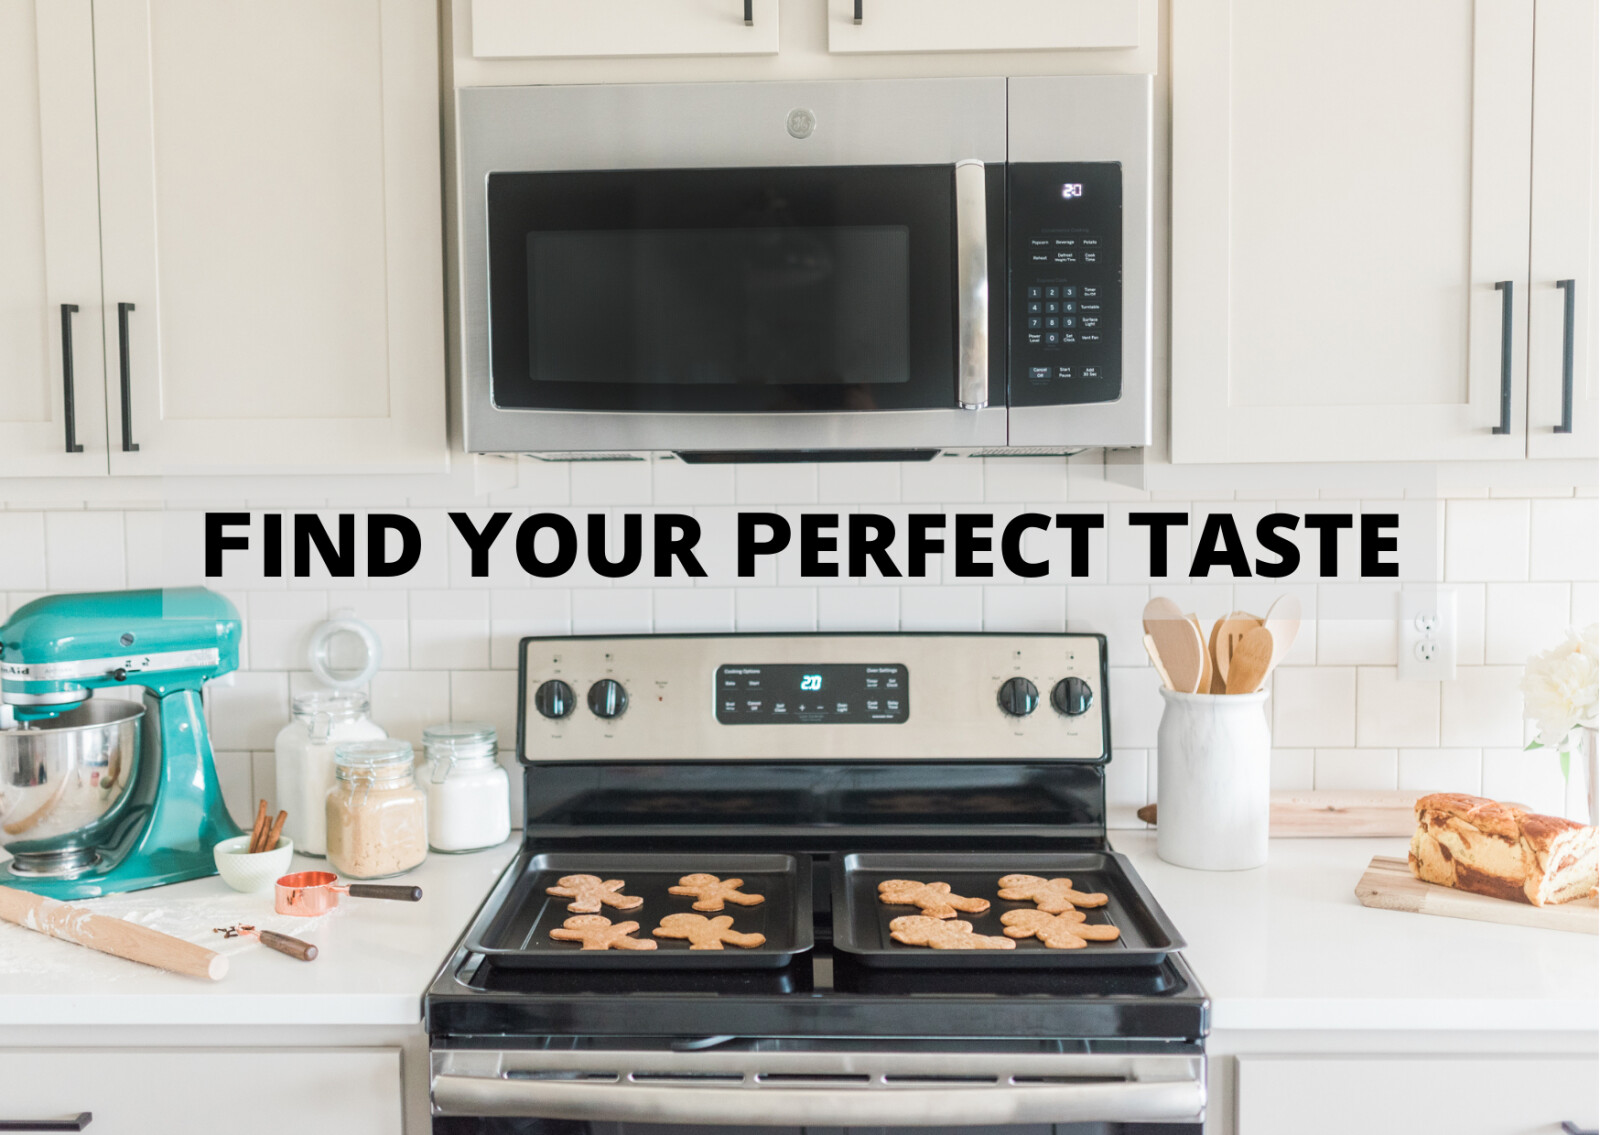 FIND YOUR PERFECT TASTE